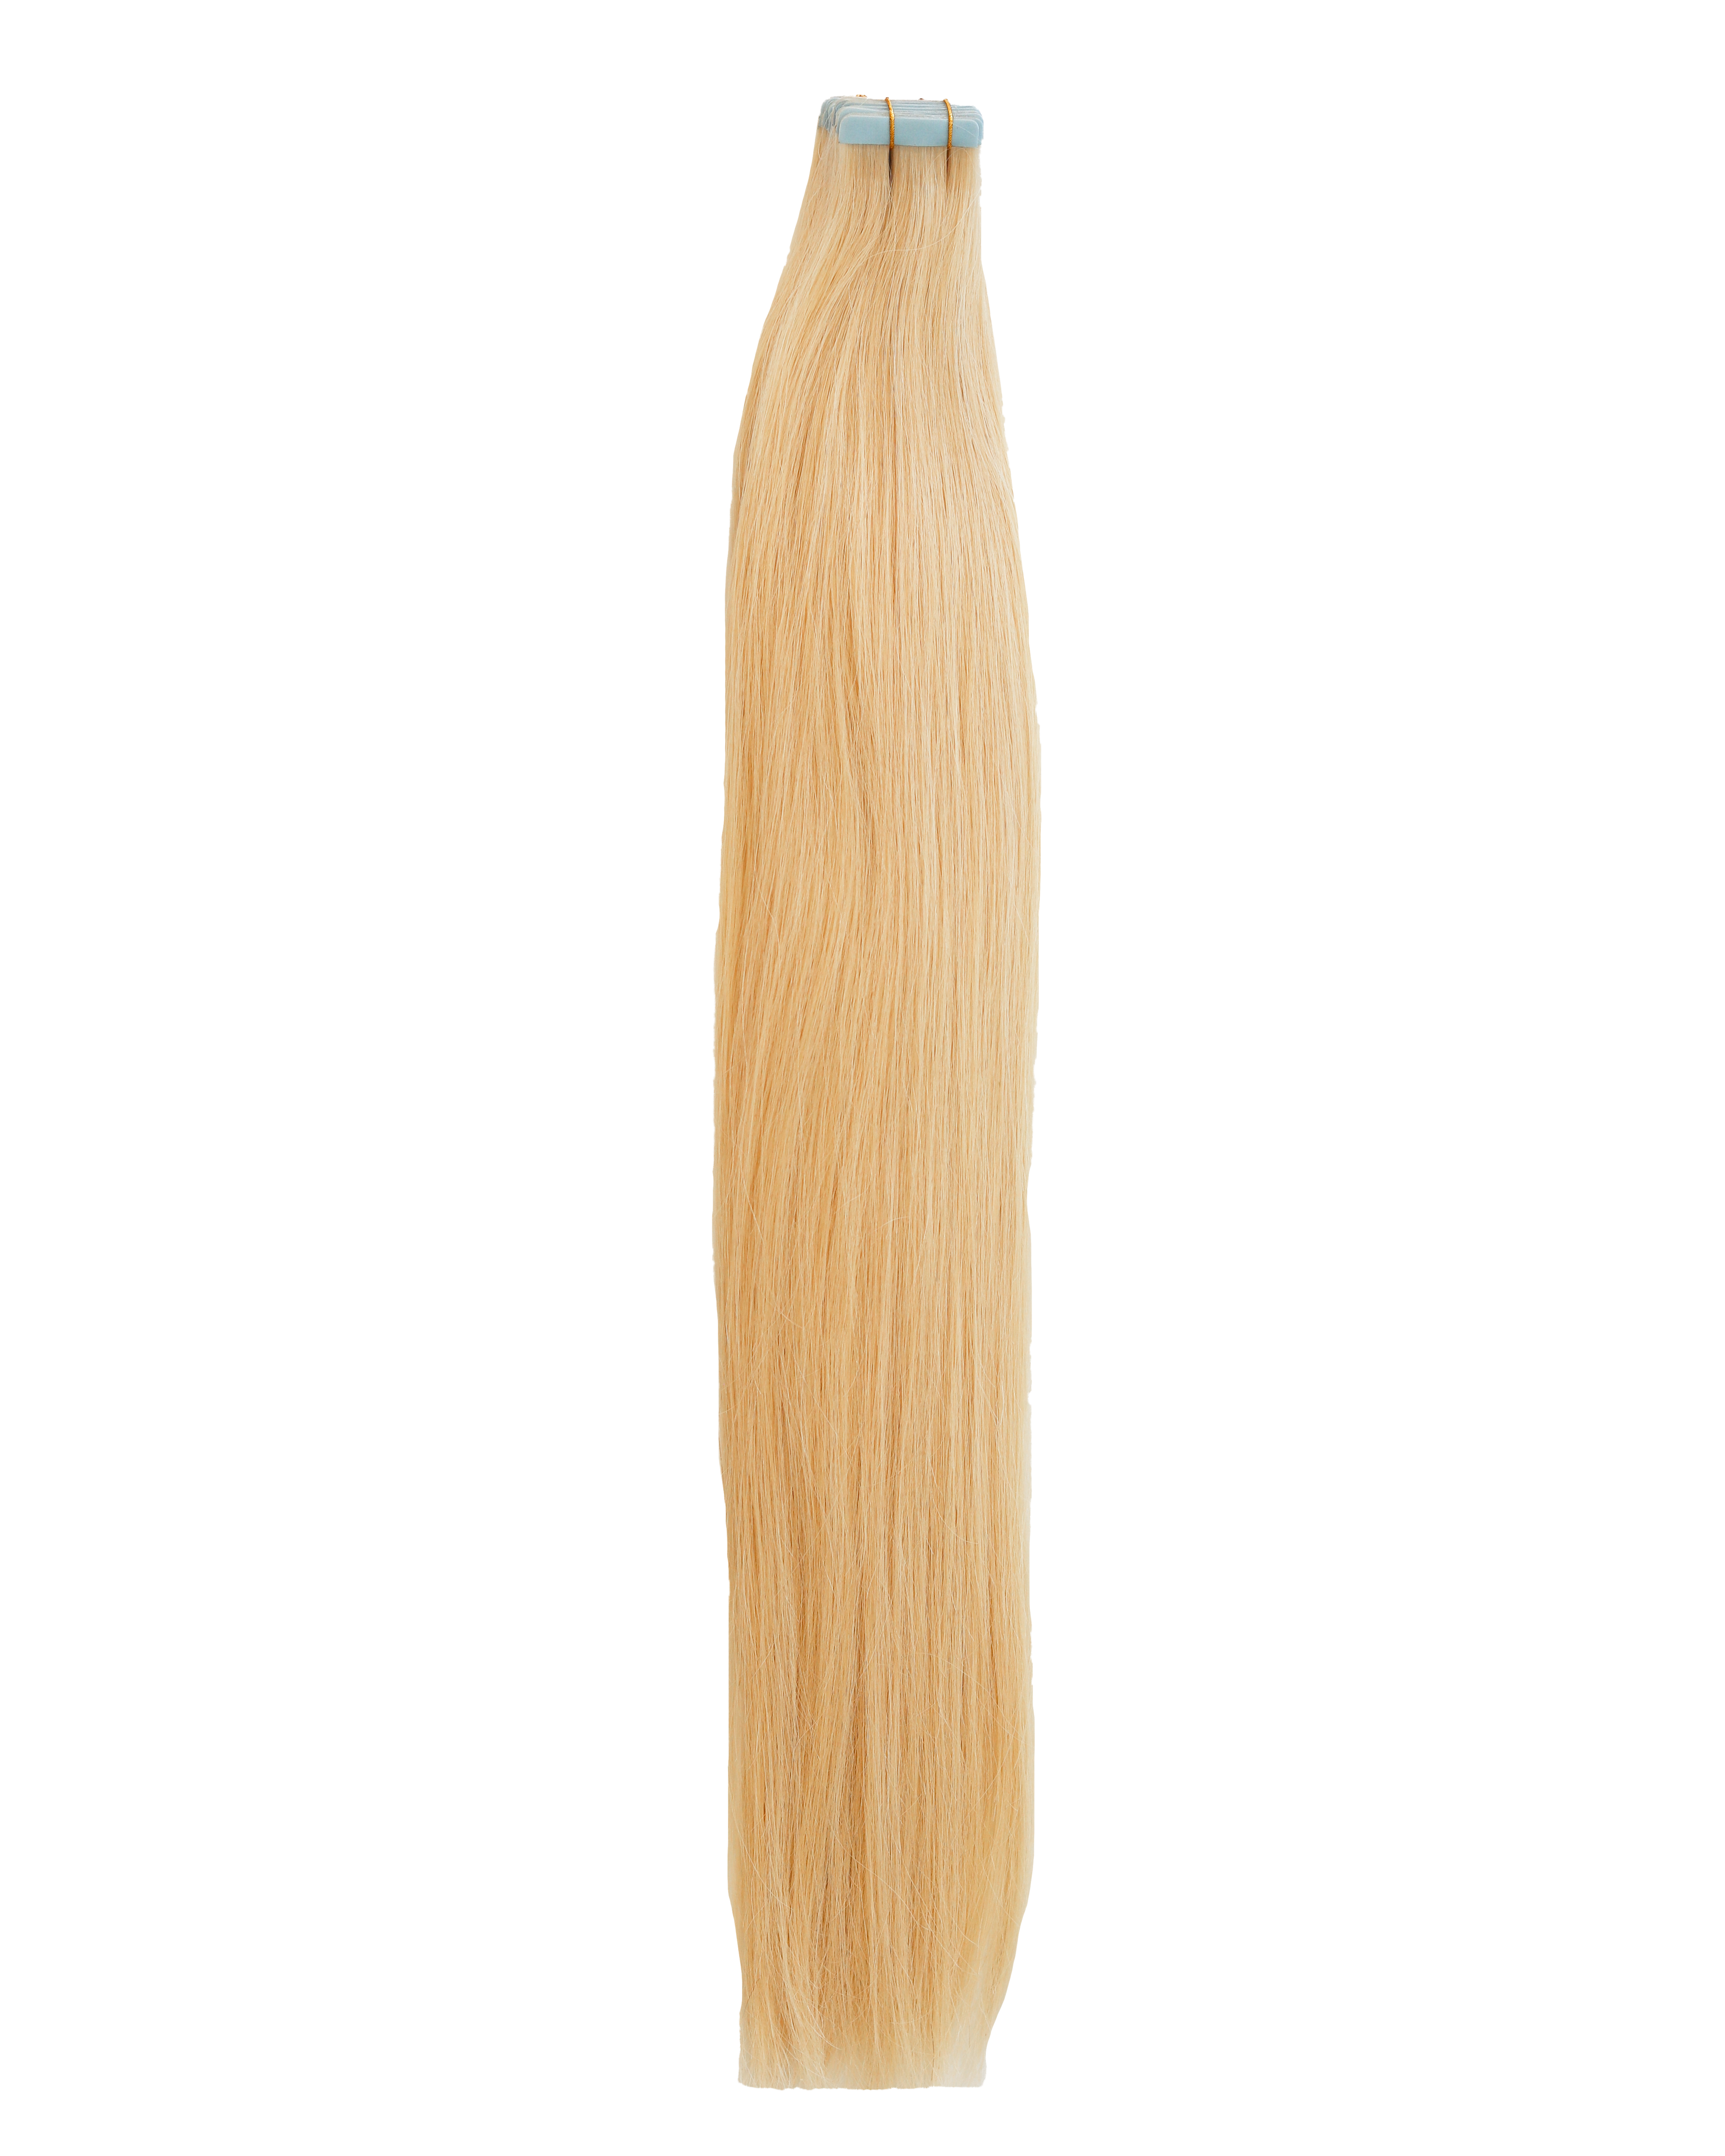 24" SANDY BLONDE Russian Hair Tape Extensions 20pc